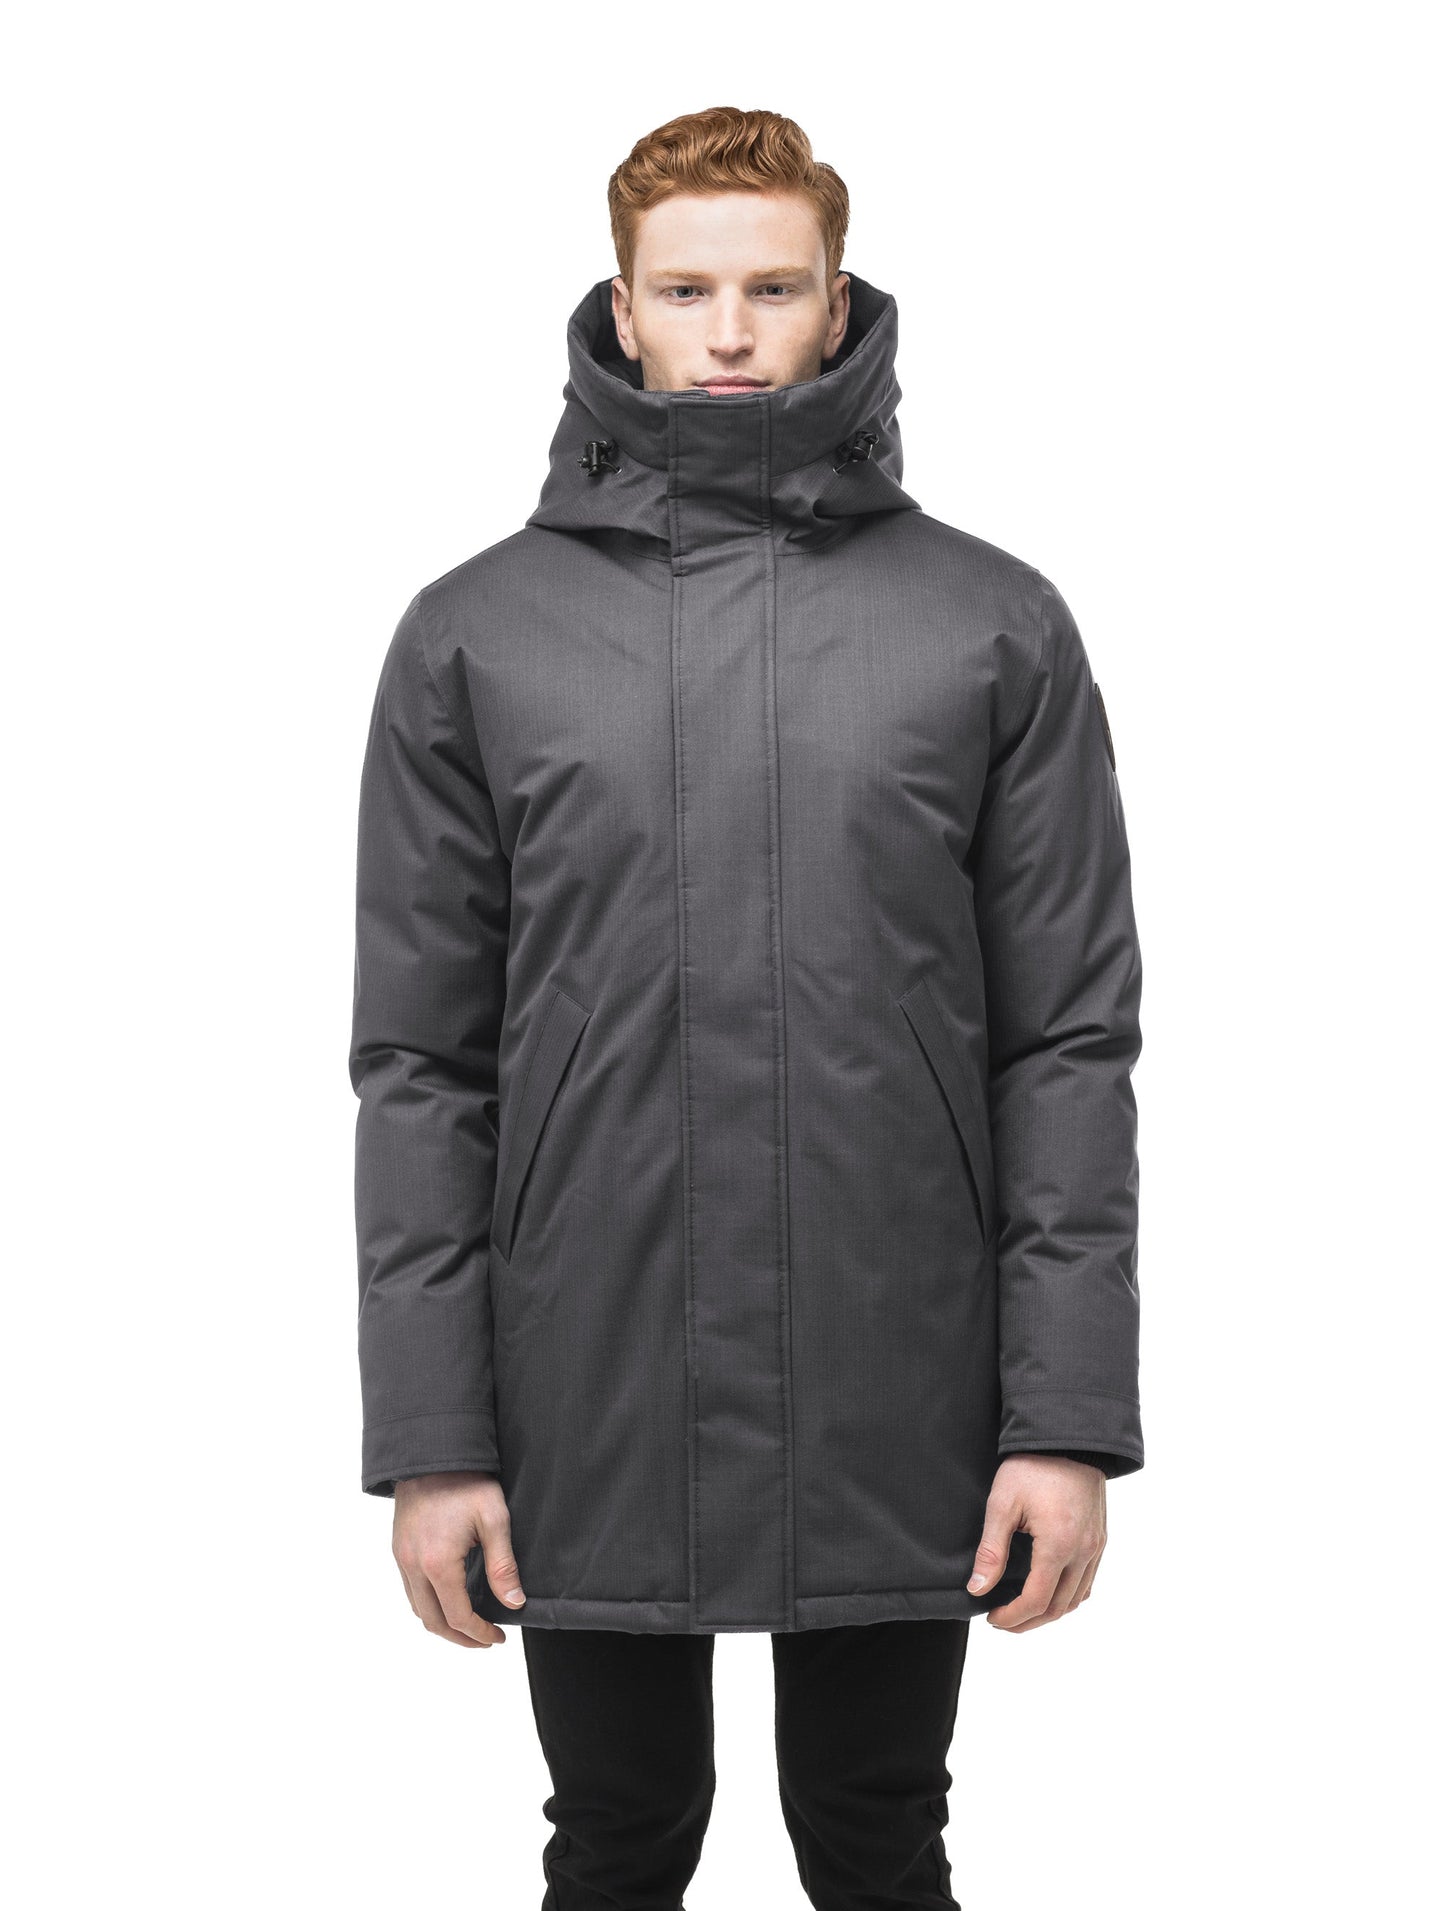 Pierre Men's Jacket in thigh length, Canadian white duck down insulation, non-removable down-filled hood, angled waist pockets, centre-front zipper with wind flap, and elastic ribbed cuffs, in Steel Grey